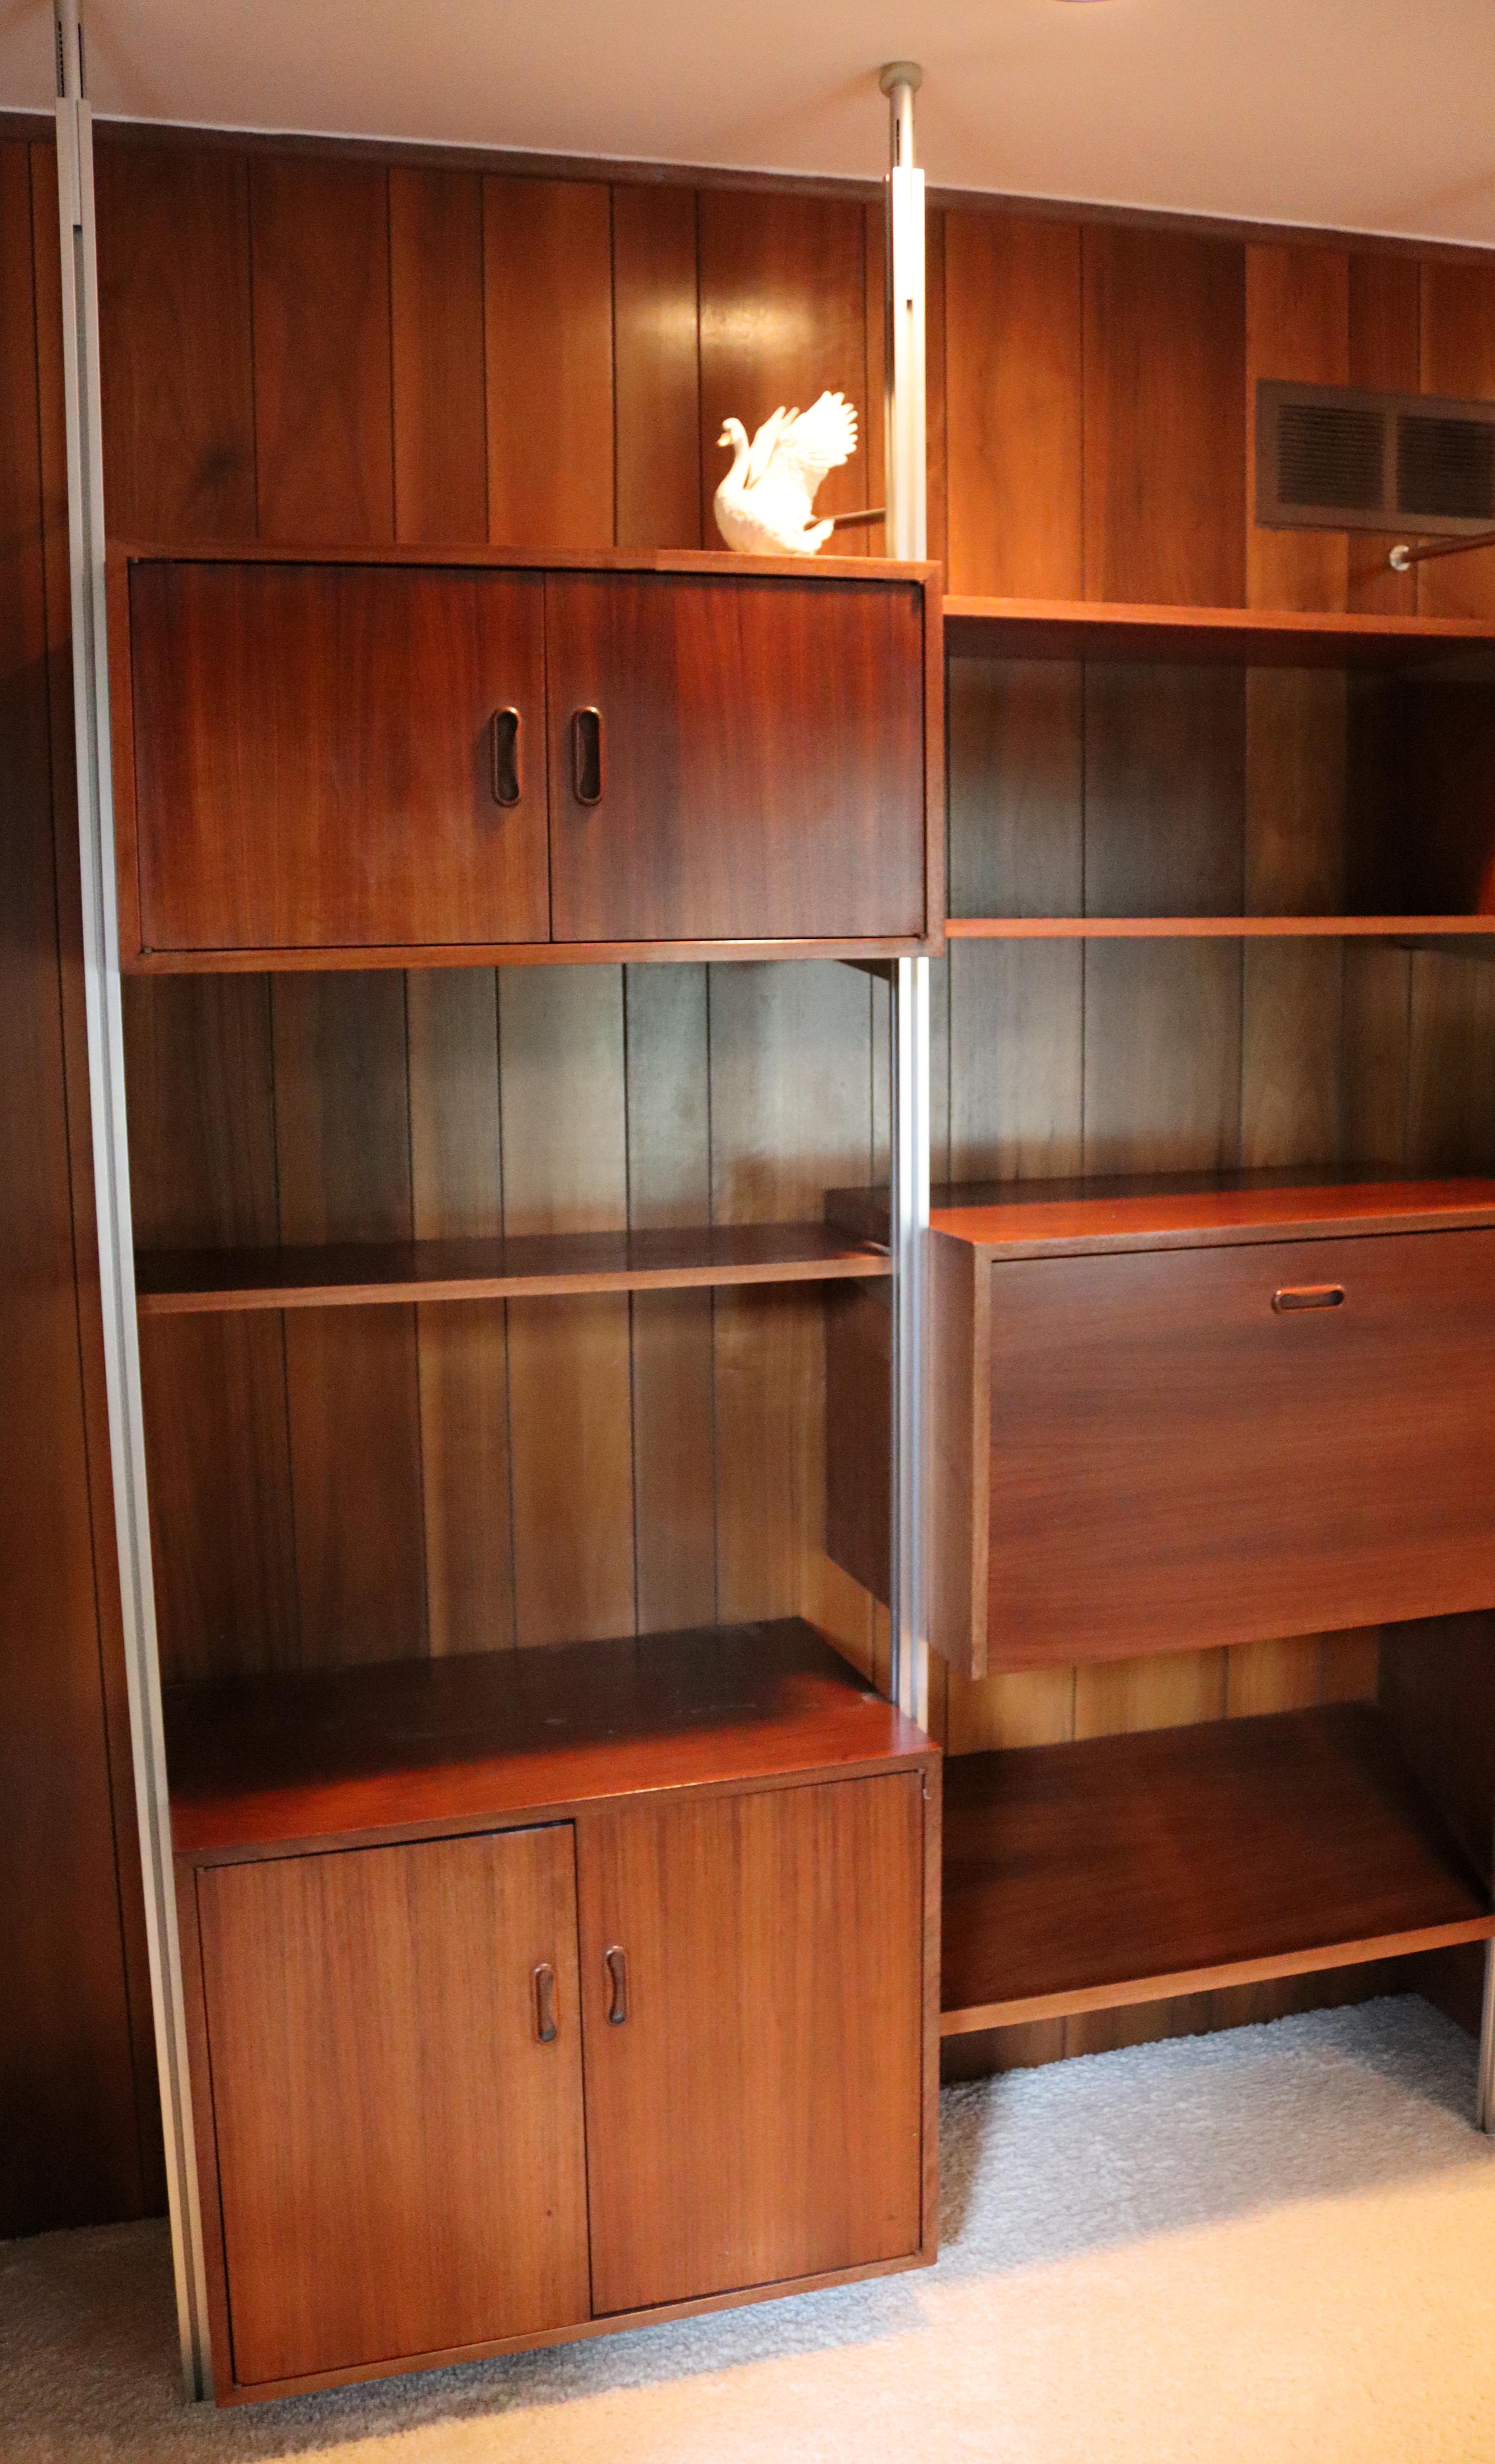 For your consideration is a wonderful Omni wall unit, with three bays and tons of storage compartments, by George Nelson, circa the 1960s. In excellent vintage condition. Dimensions: 98